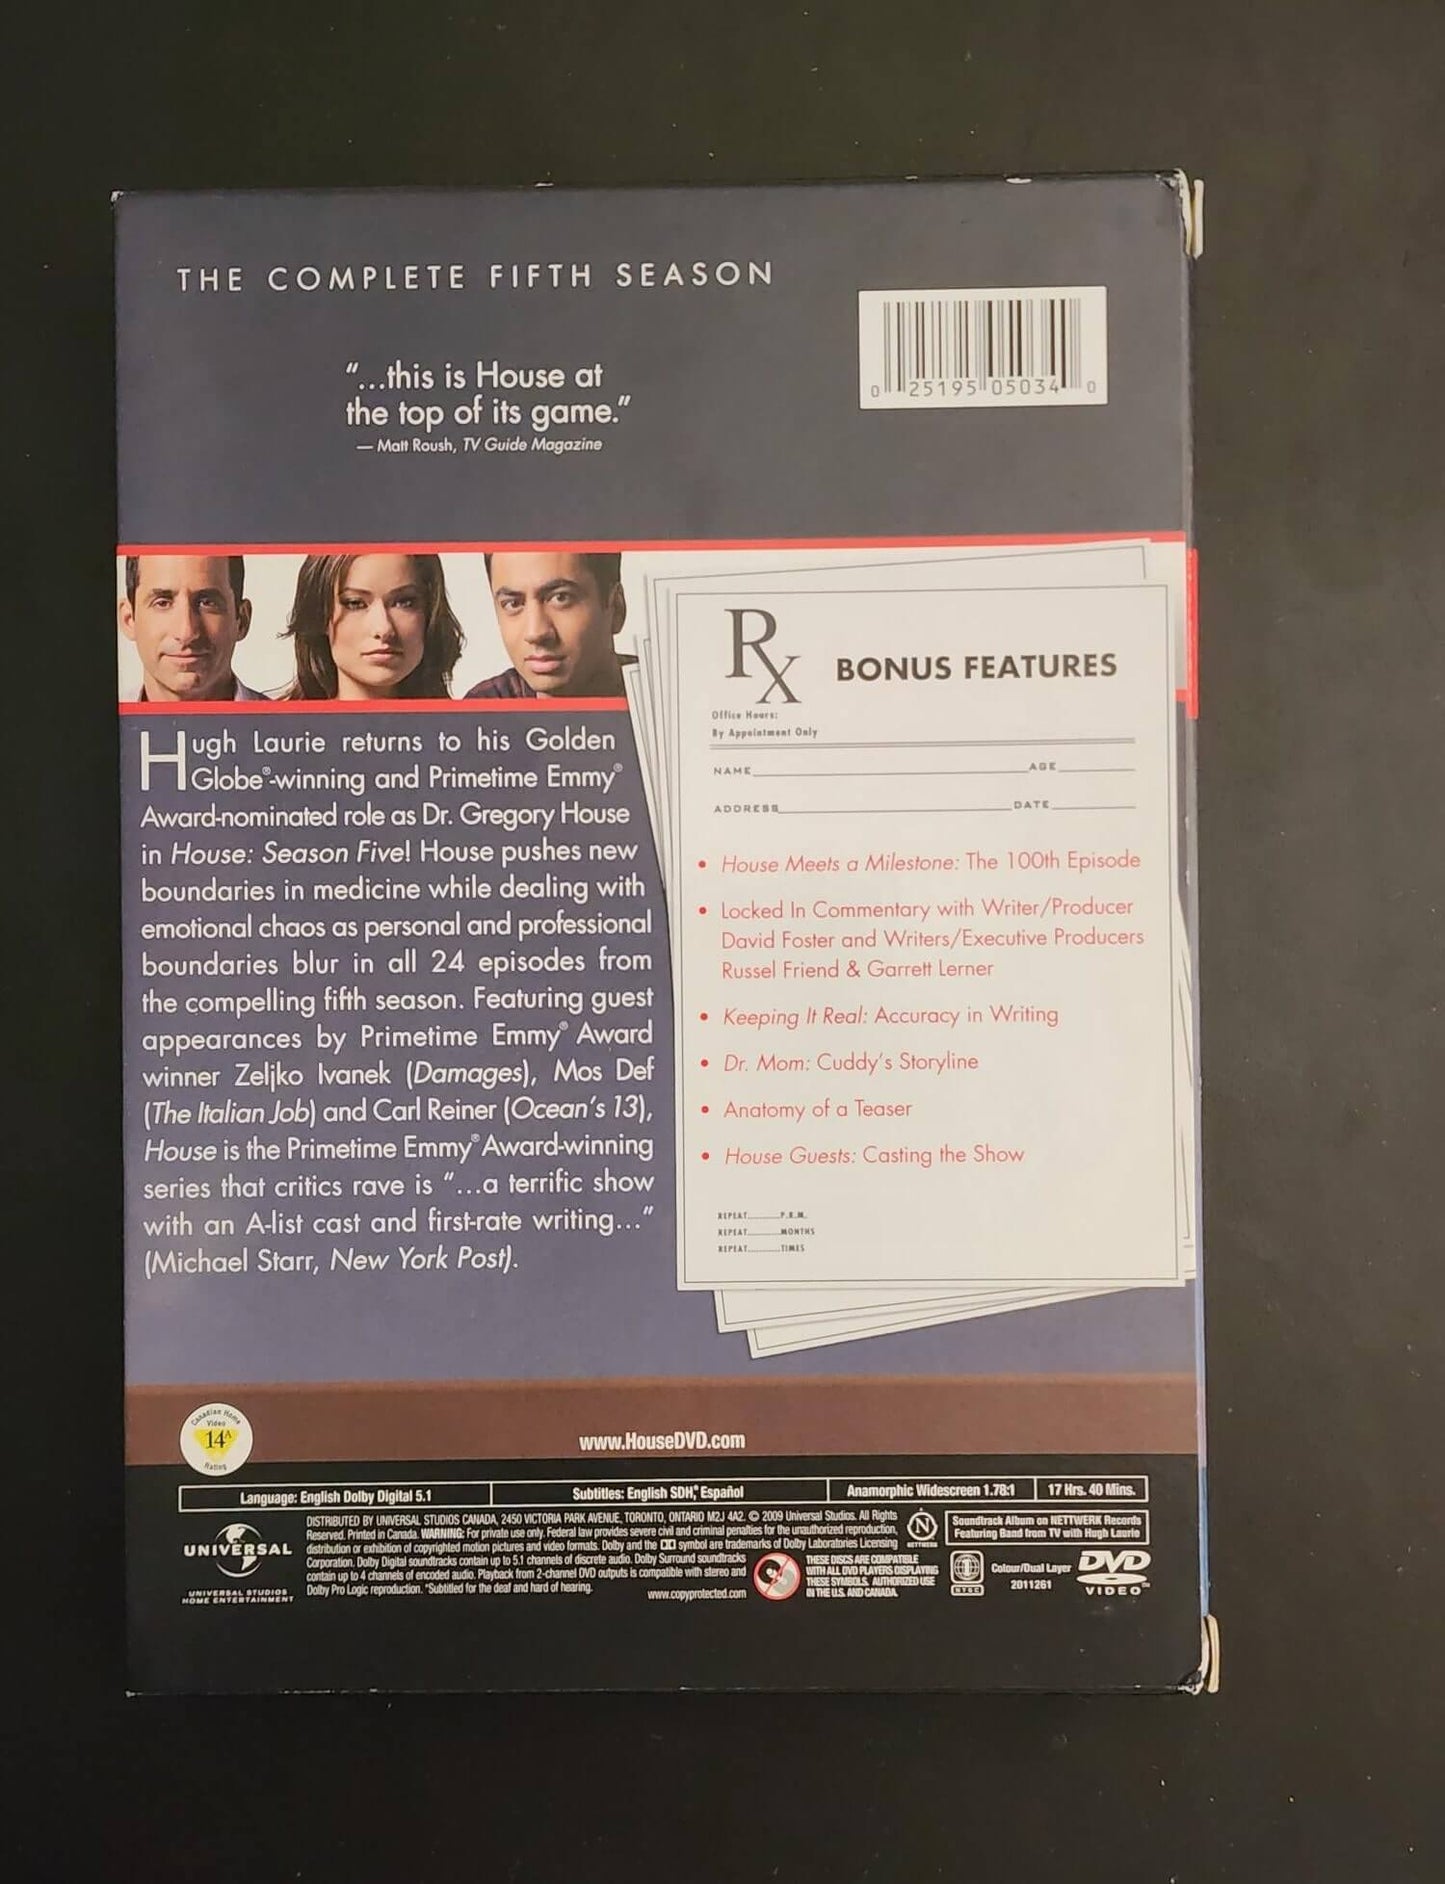 House Season 4 DVD box set: A collection of DVDs containing the fifth season of the TV show "House".